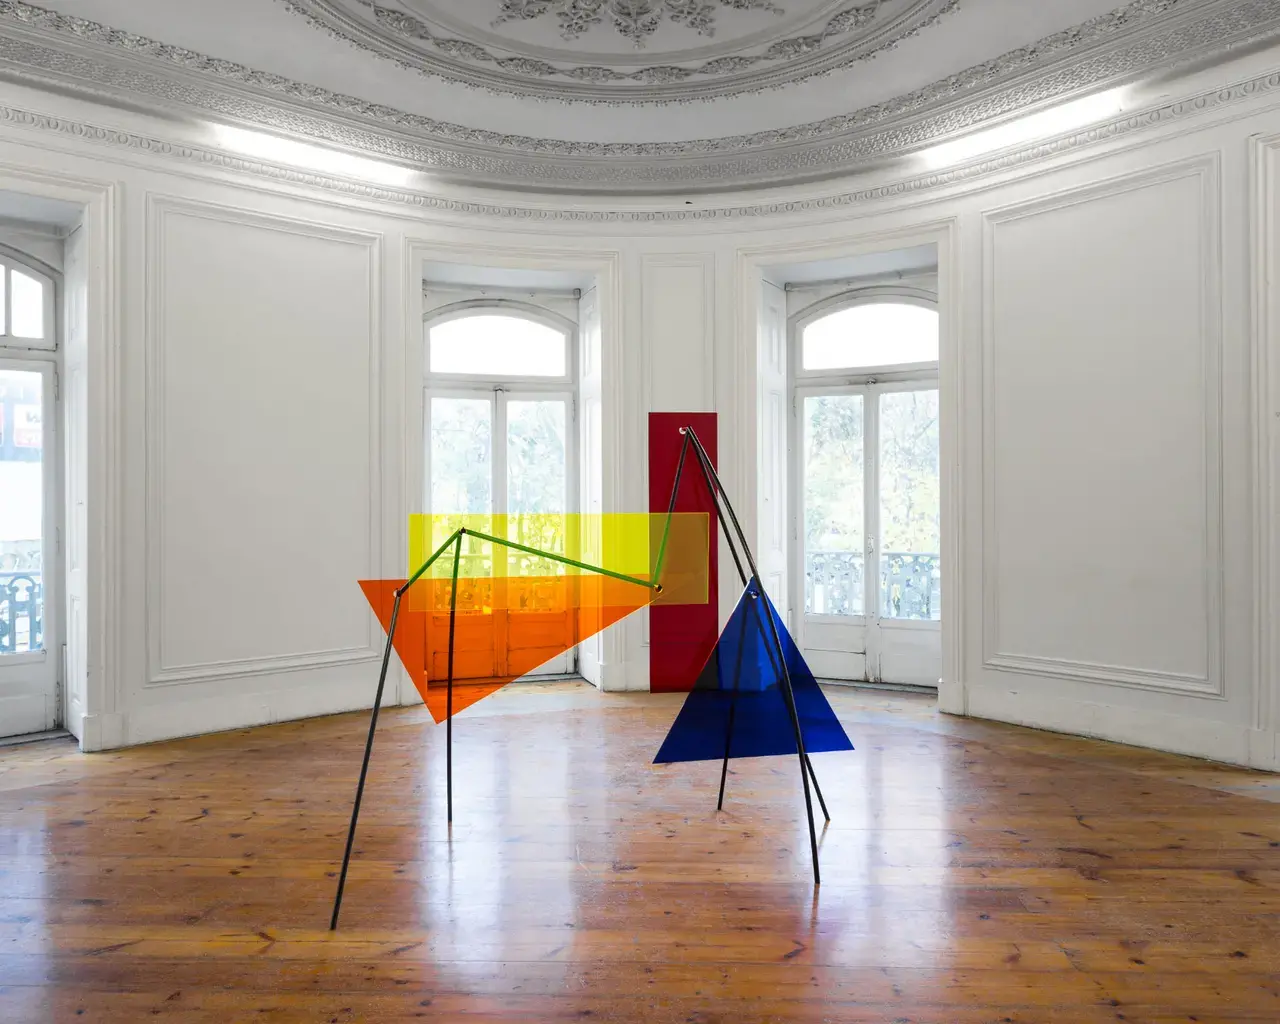 Exhibition view of Amalia Pica&rsquo;s Memorials for Intersections, Kunsthalle Lissabon, 2013. Photo by Bruno Lopes, courtesy of the Institute of Contemporary Art.